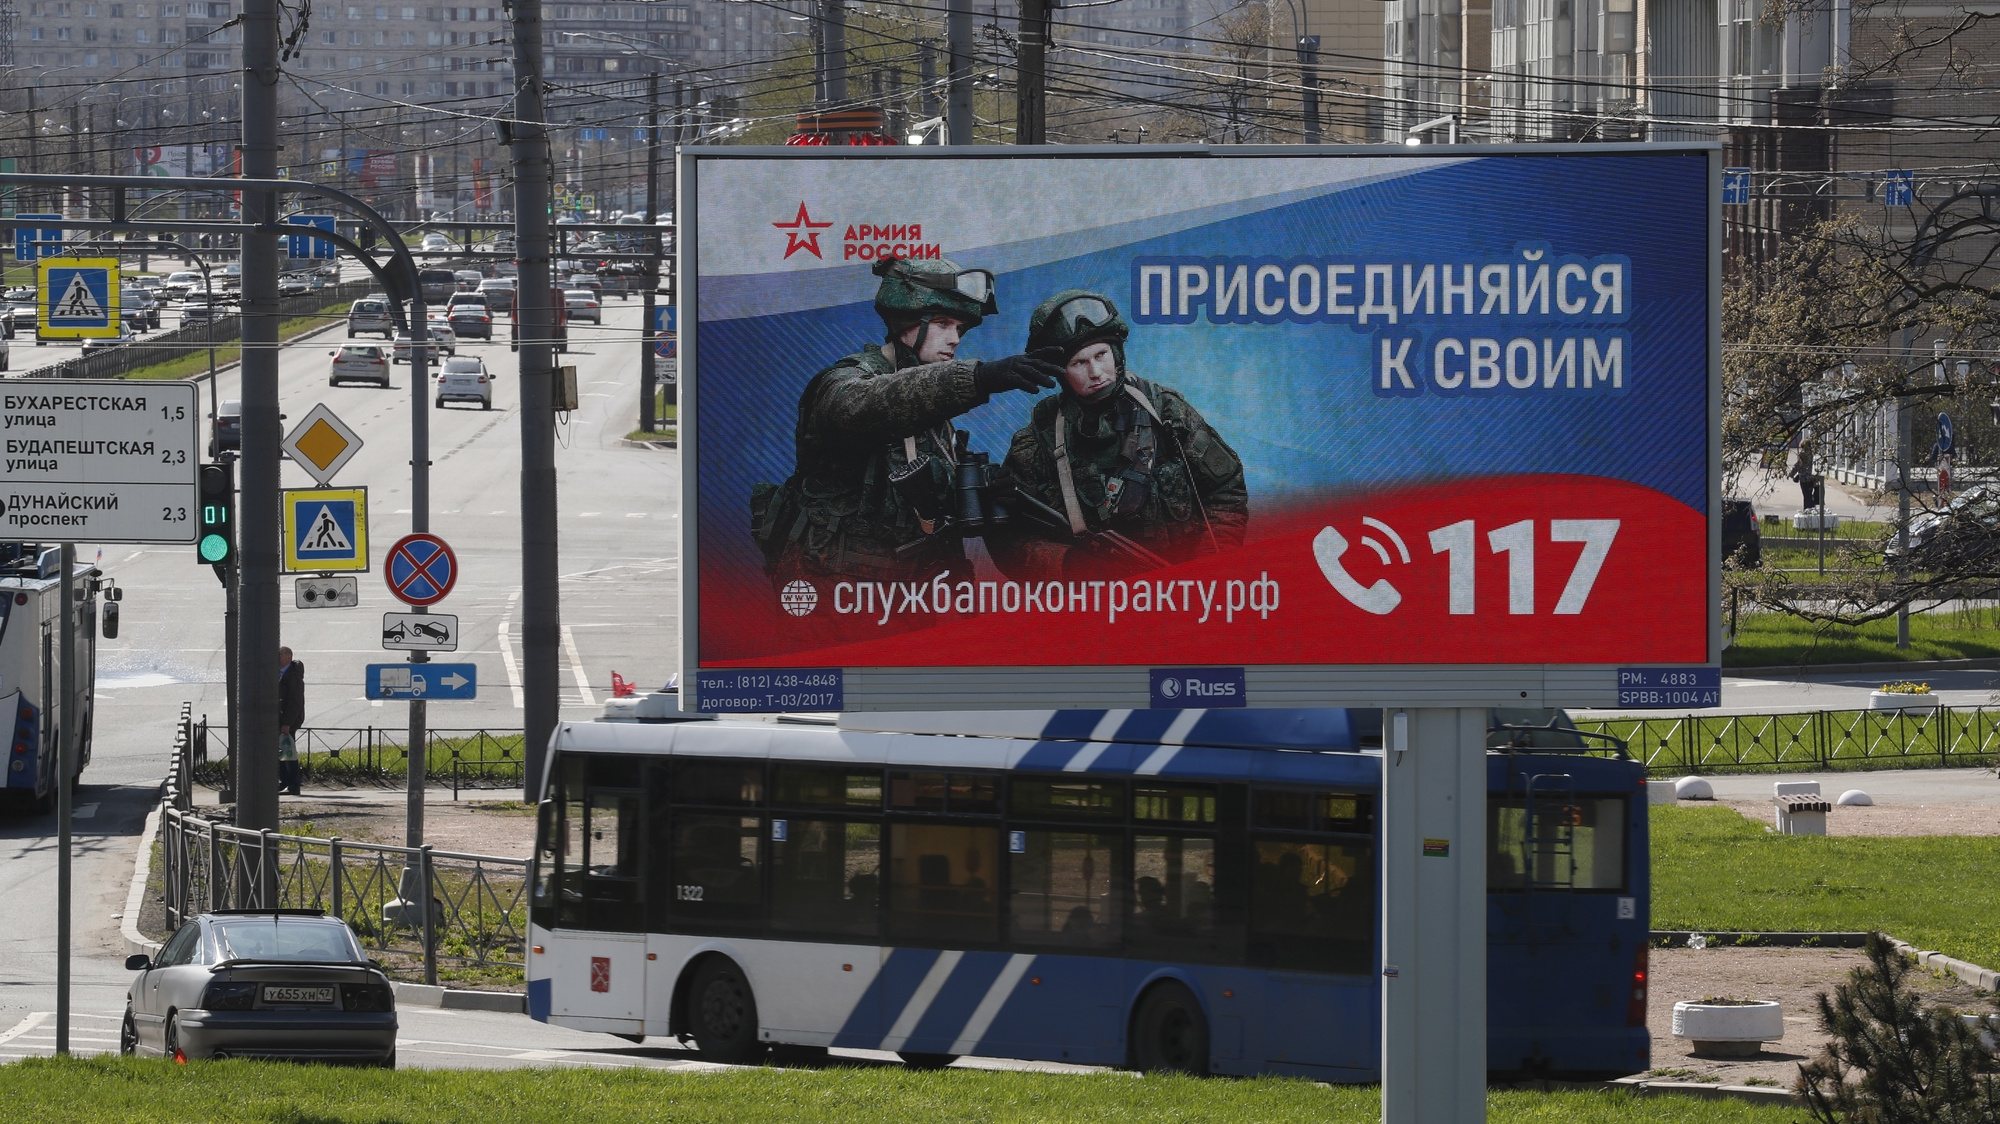 epa10602214 A digital billboard shows Russian soldiers with a slogan reading &#039;Join your comrades. Contract service&#039; in St. Petersburg, Russia, 01 May 2023. On 24 February 2022 Russian troops entered Ukrainian territory in what the Russian president declared as a &#039;Special Military Operation&#039;, starting an armed conflict.  EPA/ANATOLY MALTSEV